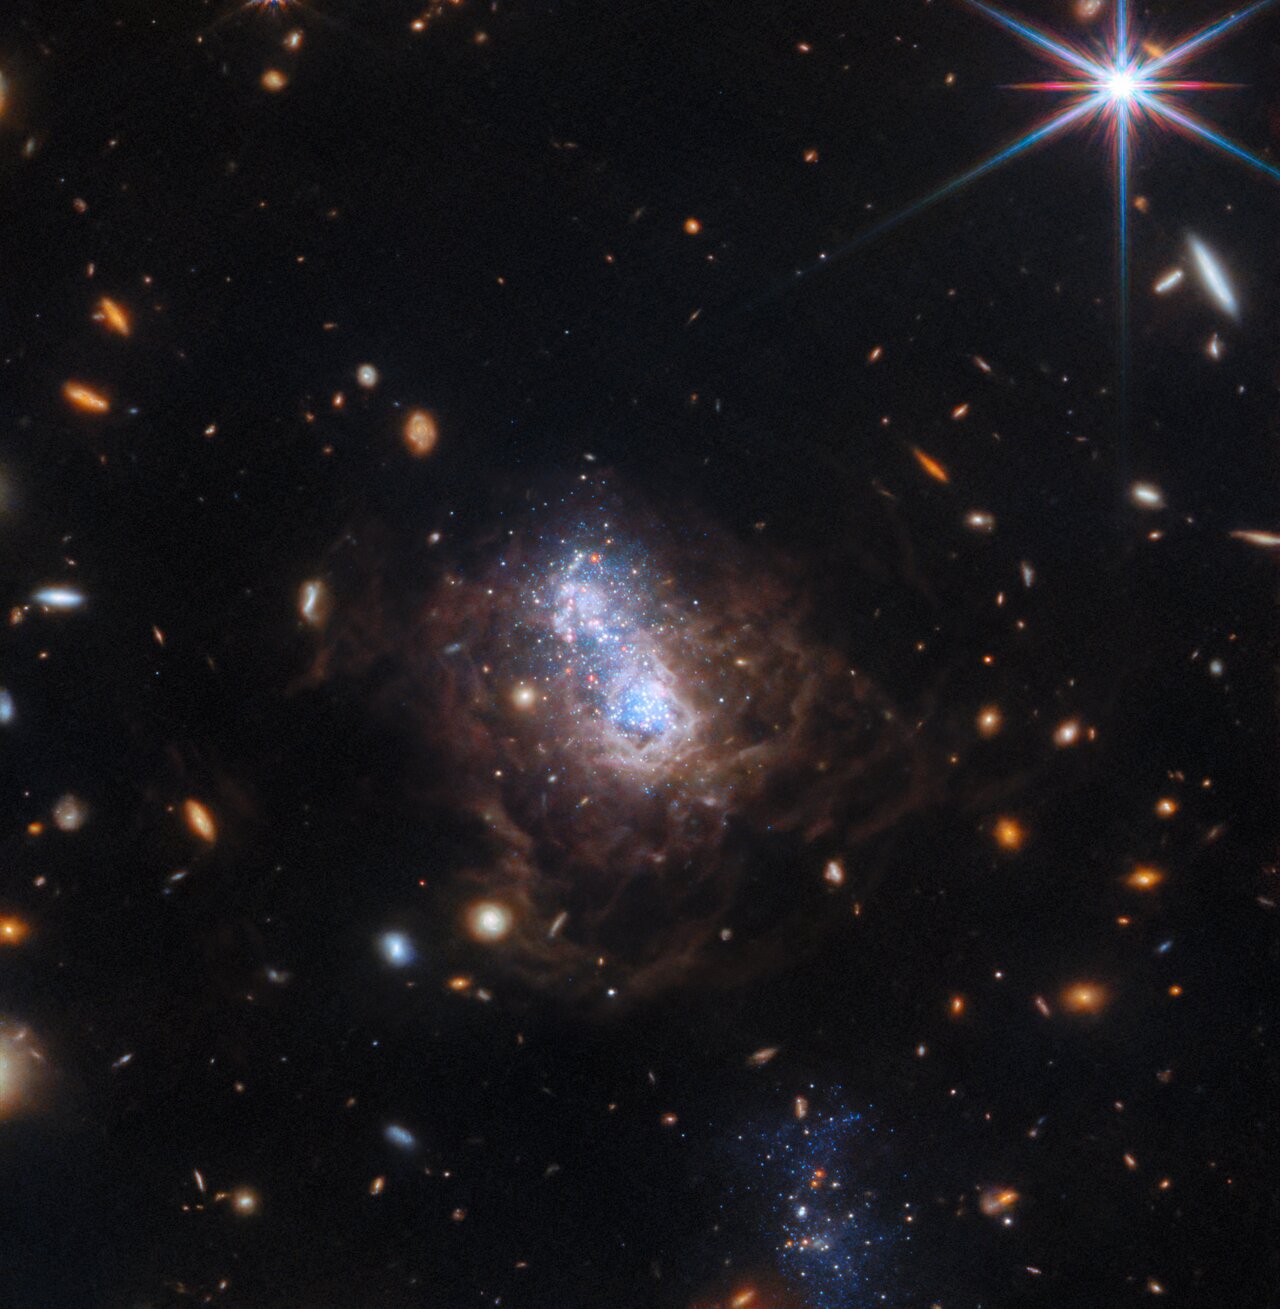 Many small galaxies are scattered on a black background: mainly, white, oval-shaped and red, spiral galaxies. The image is dominated by a dwarf irregular galaxy, which hosts a bright region of white and blue stars at its core that appear as two distinct lobes. This region is surrounded by brown dusty filaments. At the bottom center of the image, a companion galaxy is visible that appears as a collection of blue stars. In the top right corner, there is a very prominent, bright star that has eight long diffraction spikes.